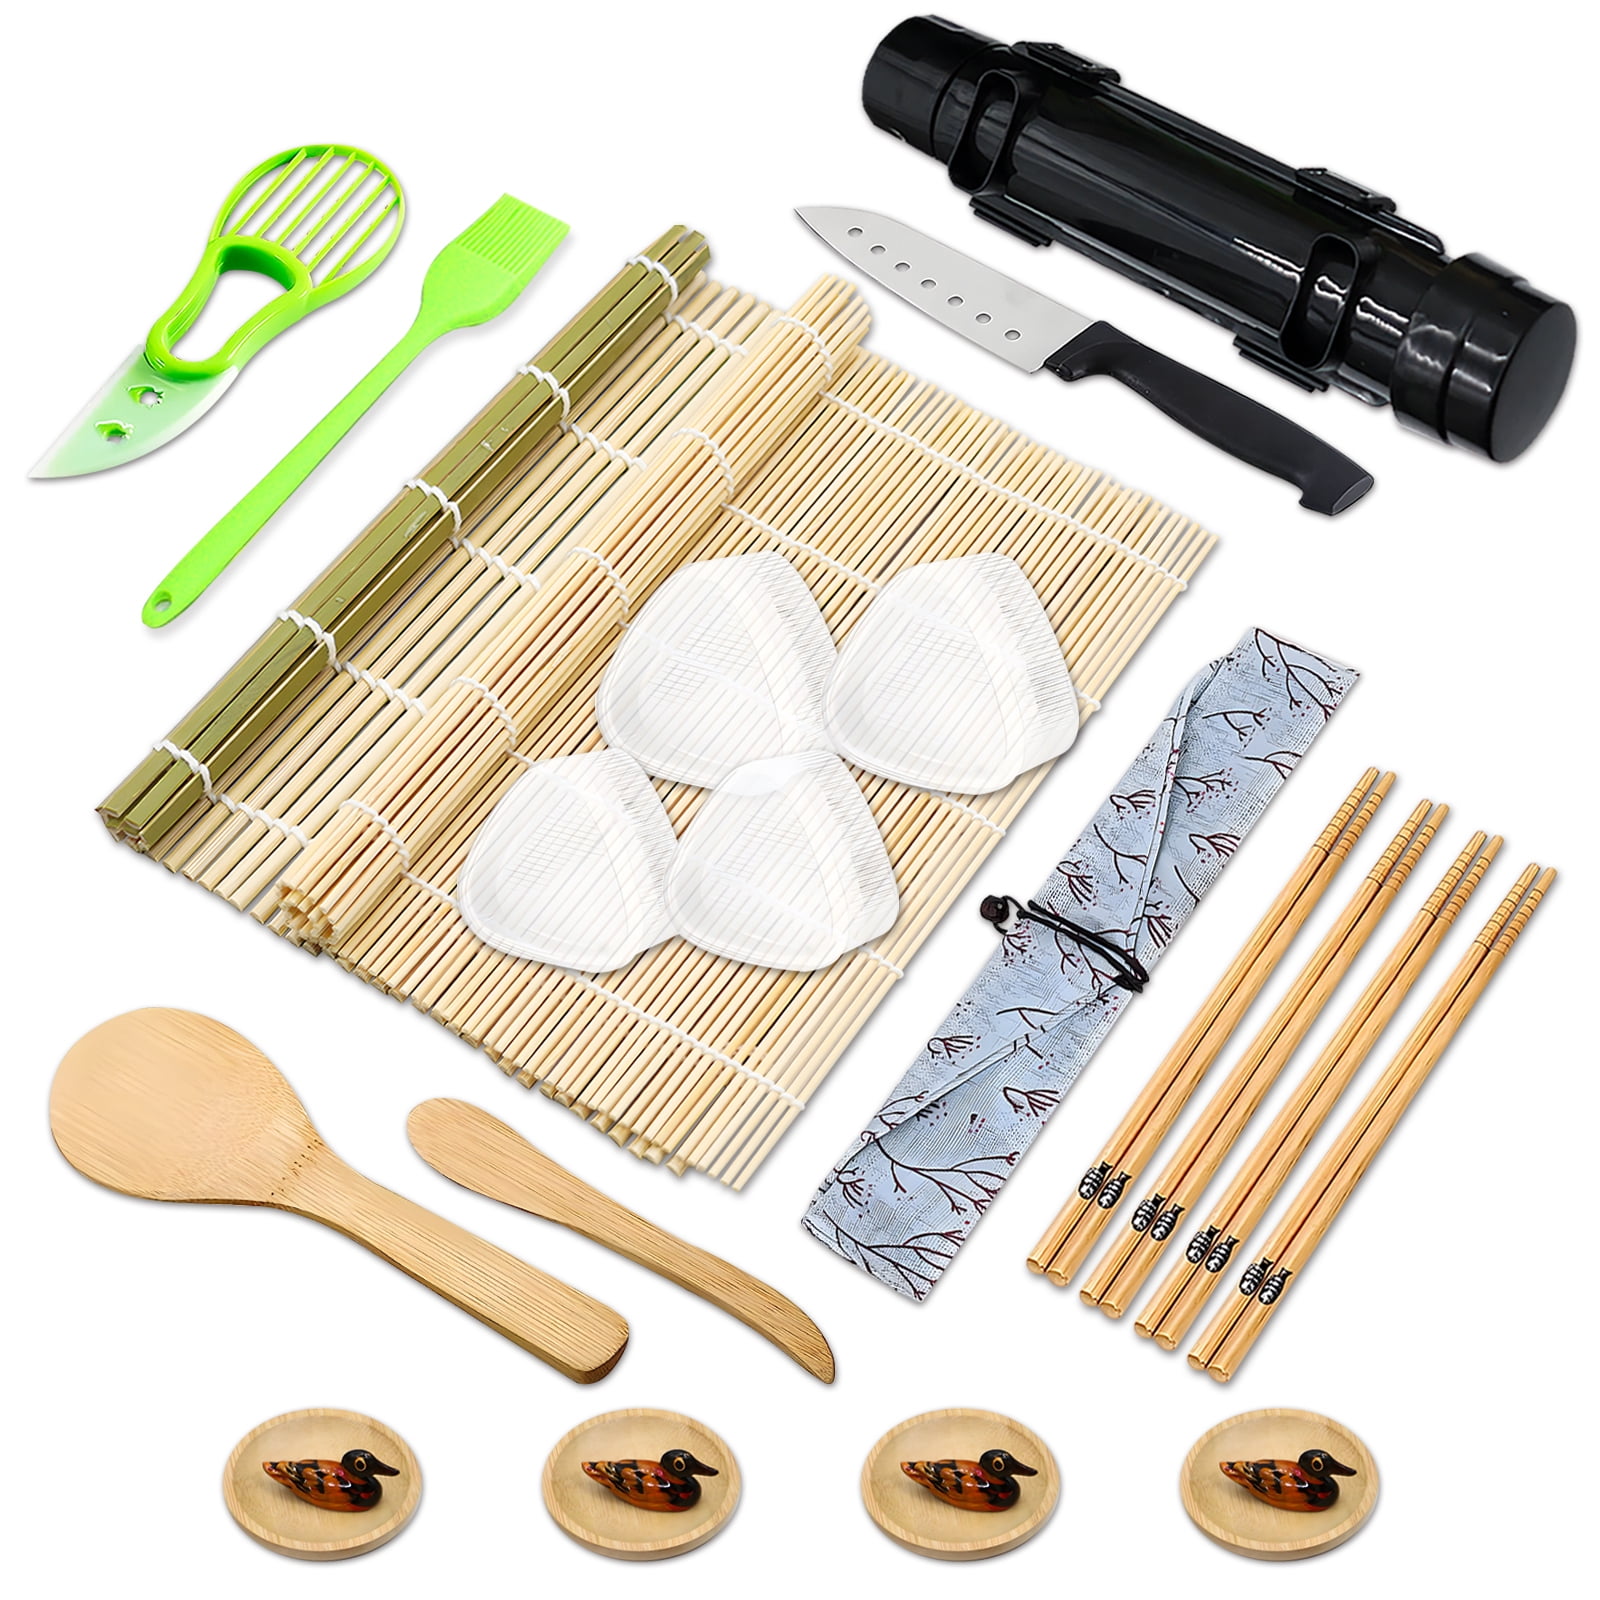 Sushi Making Kit, Sushi Roller Set, All In One Sushi Maker Kit, With Bamboo Rolling  Mat, Sushi Bazooka, Chopsticks Holders, Rice Paddle, Avocado Slicer For  Beginners, Family, Friends, Home, Kitchen Stuff, 